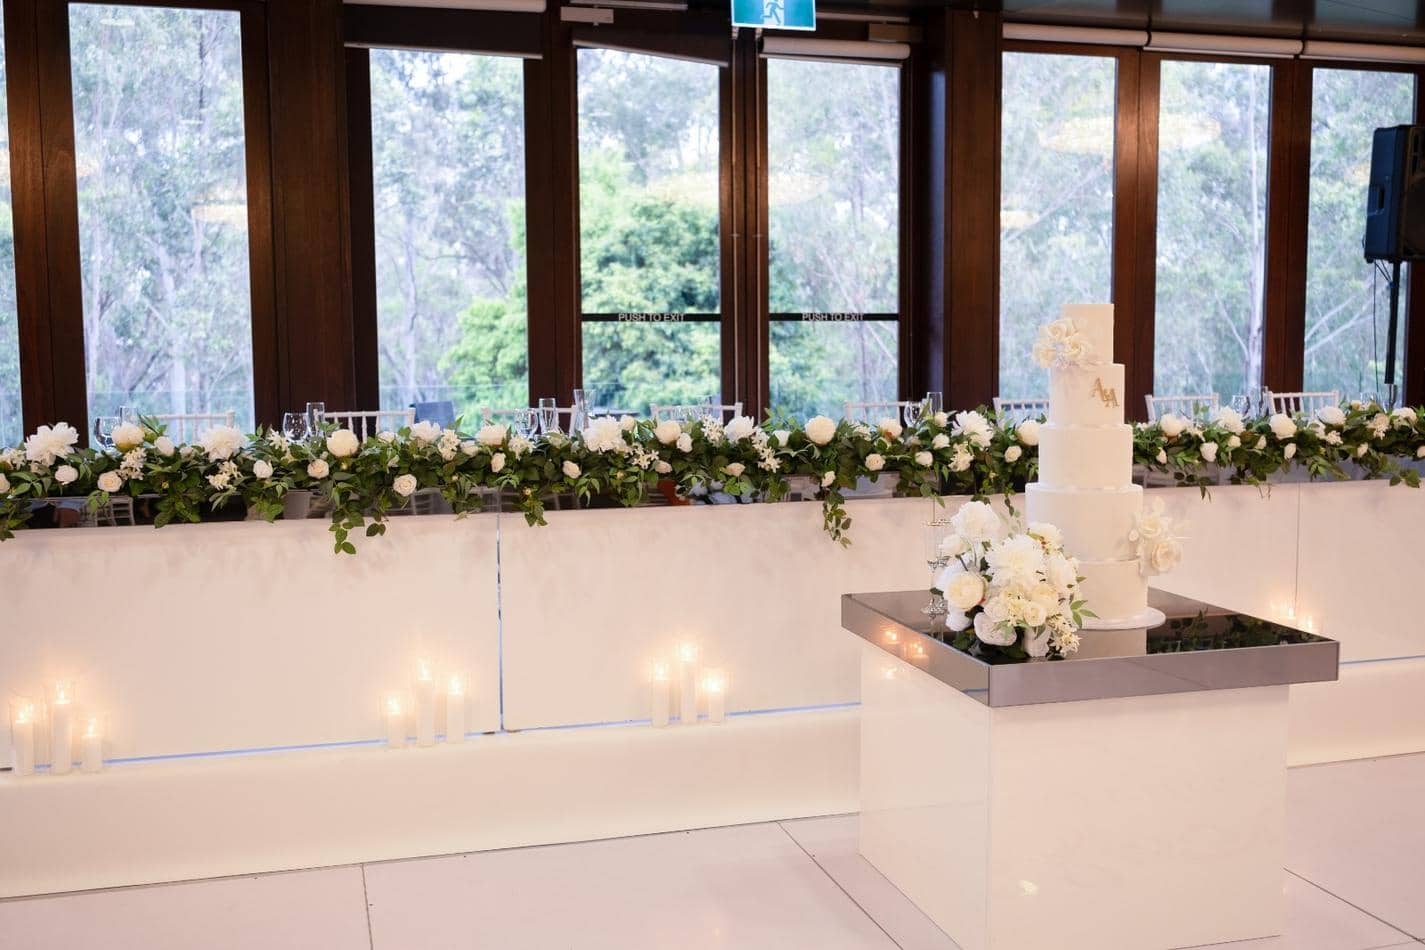 A Gloss Bridal wedding reception with white flowers and candles on a table.